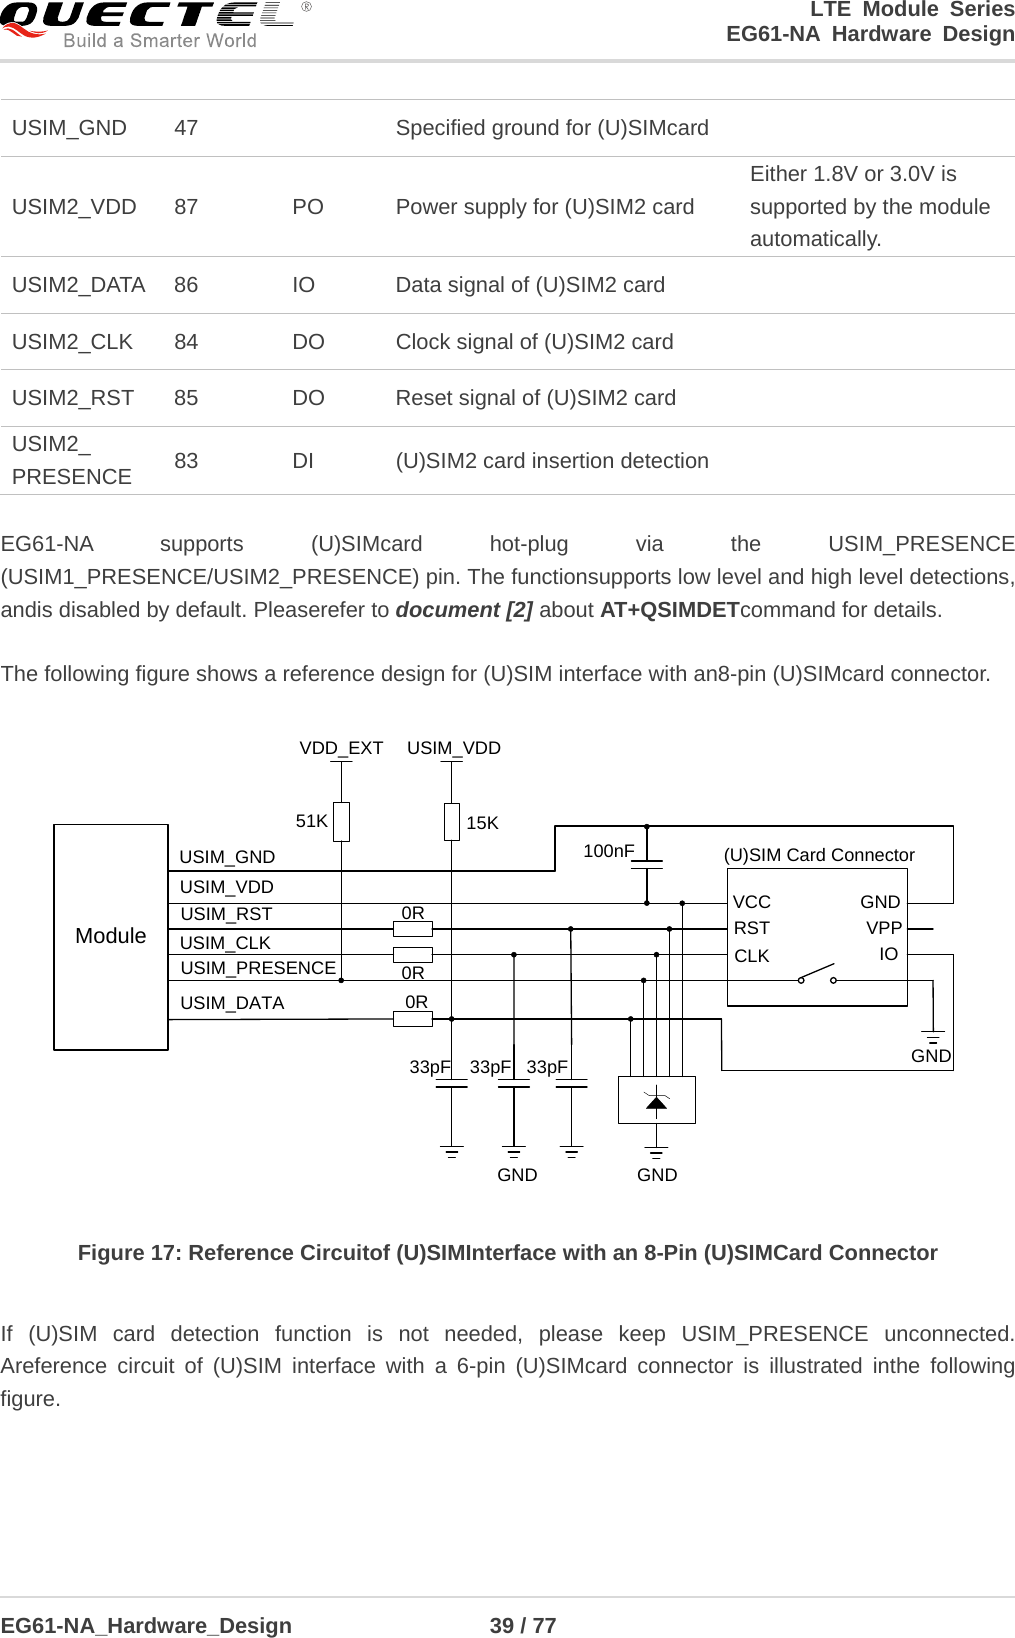 LTE Module Series                                                  EG61-NA Hardware Design  EG61-NA_Hardware_Design                  39 / 77    USIM_GND 47    Specified ground for (U)SIMcard   USIM2_VDD 87 PO Power supply for (U)SIM2 card Either 1.8V or 3.0V is supported by the module automatically. USIM2_DATA 86 IO Data signal of (U)SIM2 card   USIM2_CLK 84 DO Clock signal of (U)SIM2 card   USIM2_RST 85 DO Reset signal of (U)SIM2 card   USIM2_ PRESENCE 83 DI  (U)SIM2 card insertion detection    EG61-NA supports  (U)SIMcard hot-plug via the USIM_PRESENCE (USIM1_PRESENCE/USIM2_PRESENCE) pin. The functionsupports low level and high level detections, andis disabled by default. Pleaserefer to document [2] about AT+QSIMDETcommand for details.  The following figure shows a reference design for (U)SIM interface with an8-pin (U)SIMcard connector. ModuleUSIM_VDDUSIM_GNDUSIM_RSTUSIM_CLKUSIM_DATAUSIM_PRESENCE0R0R0RVDD_EXT51K100nFGNDGND33pF 33pF 33pFVCCRSTCLK IOVPPGNDGNDUSIM_VDD15K(U)SIM Card Connector Figure 17: Reference Circuitof (U)SIMInterface with an 8-Pin (U)SIMCard Connector  If  (U)SIM card detection function is not needed,  please  keep USIM_PRESENCE unconnected. Areference circuit of  (U)SIM interface with a  6-pin  (U)SIMcard connector is illustrated inthe following figure. 